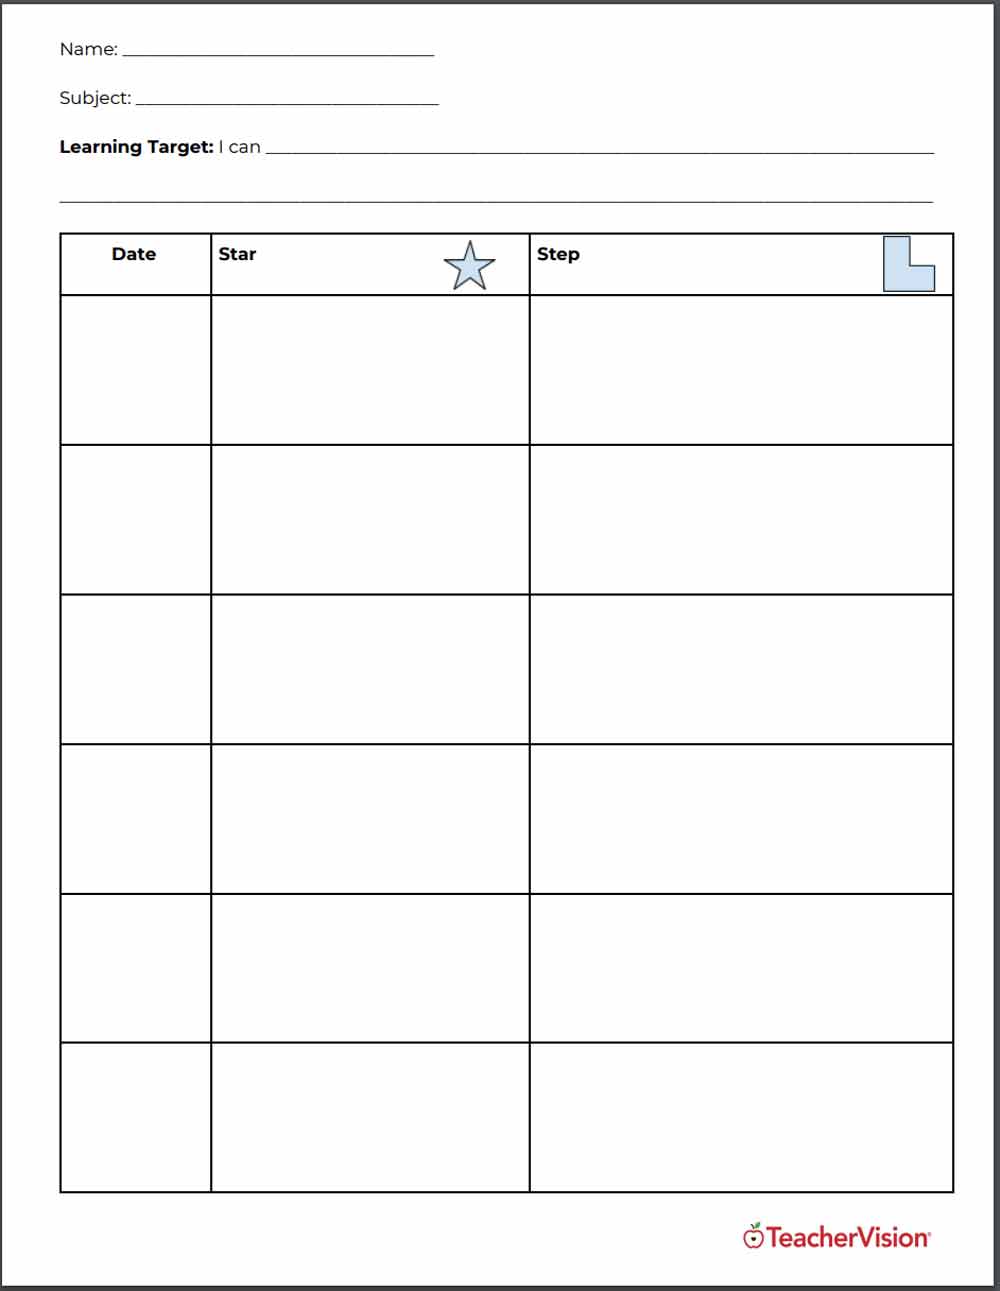 a form for teachers to give students feedback on the learning target 